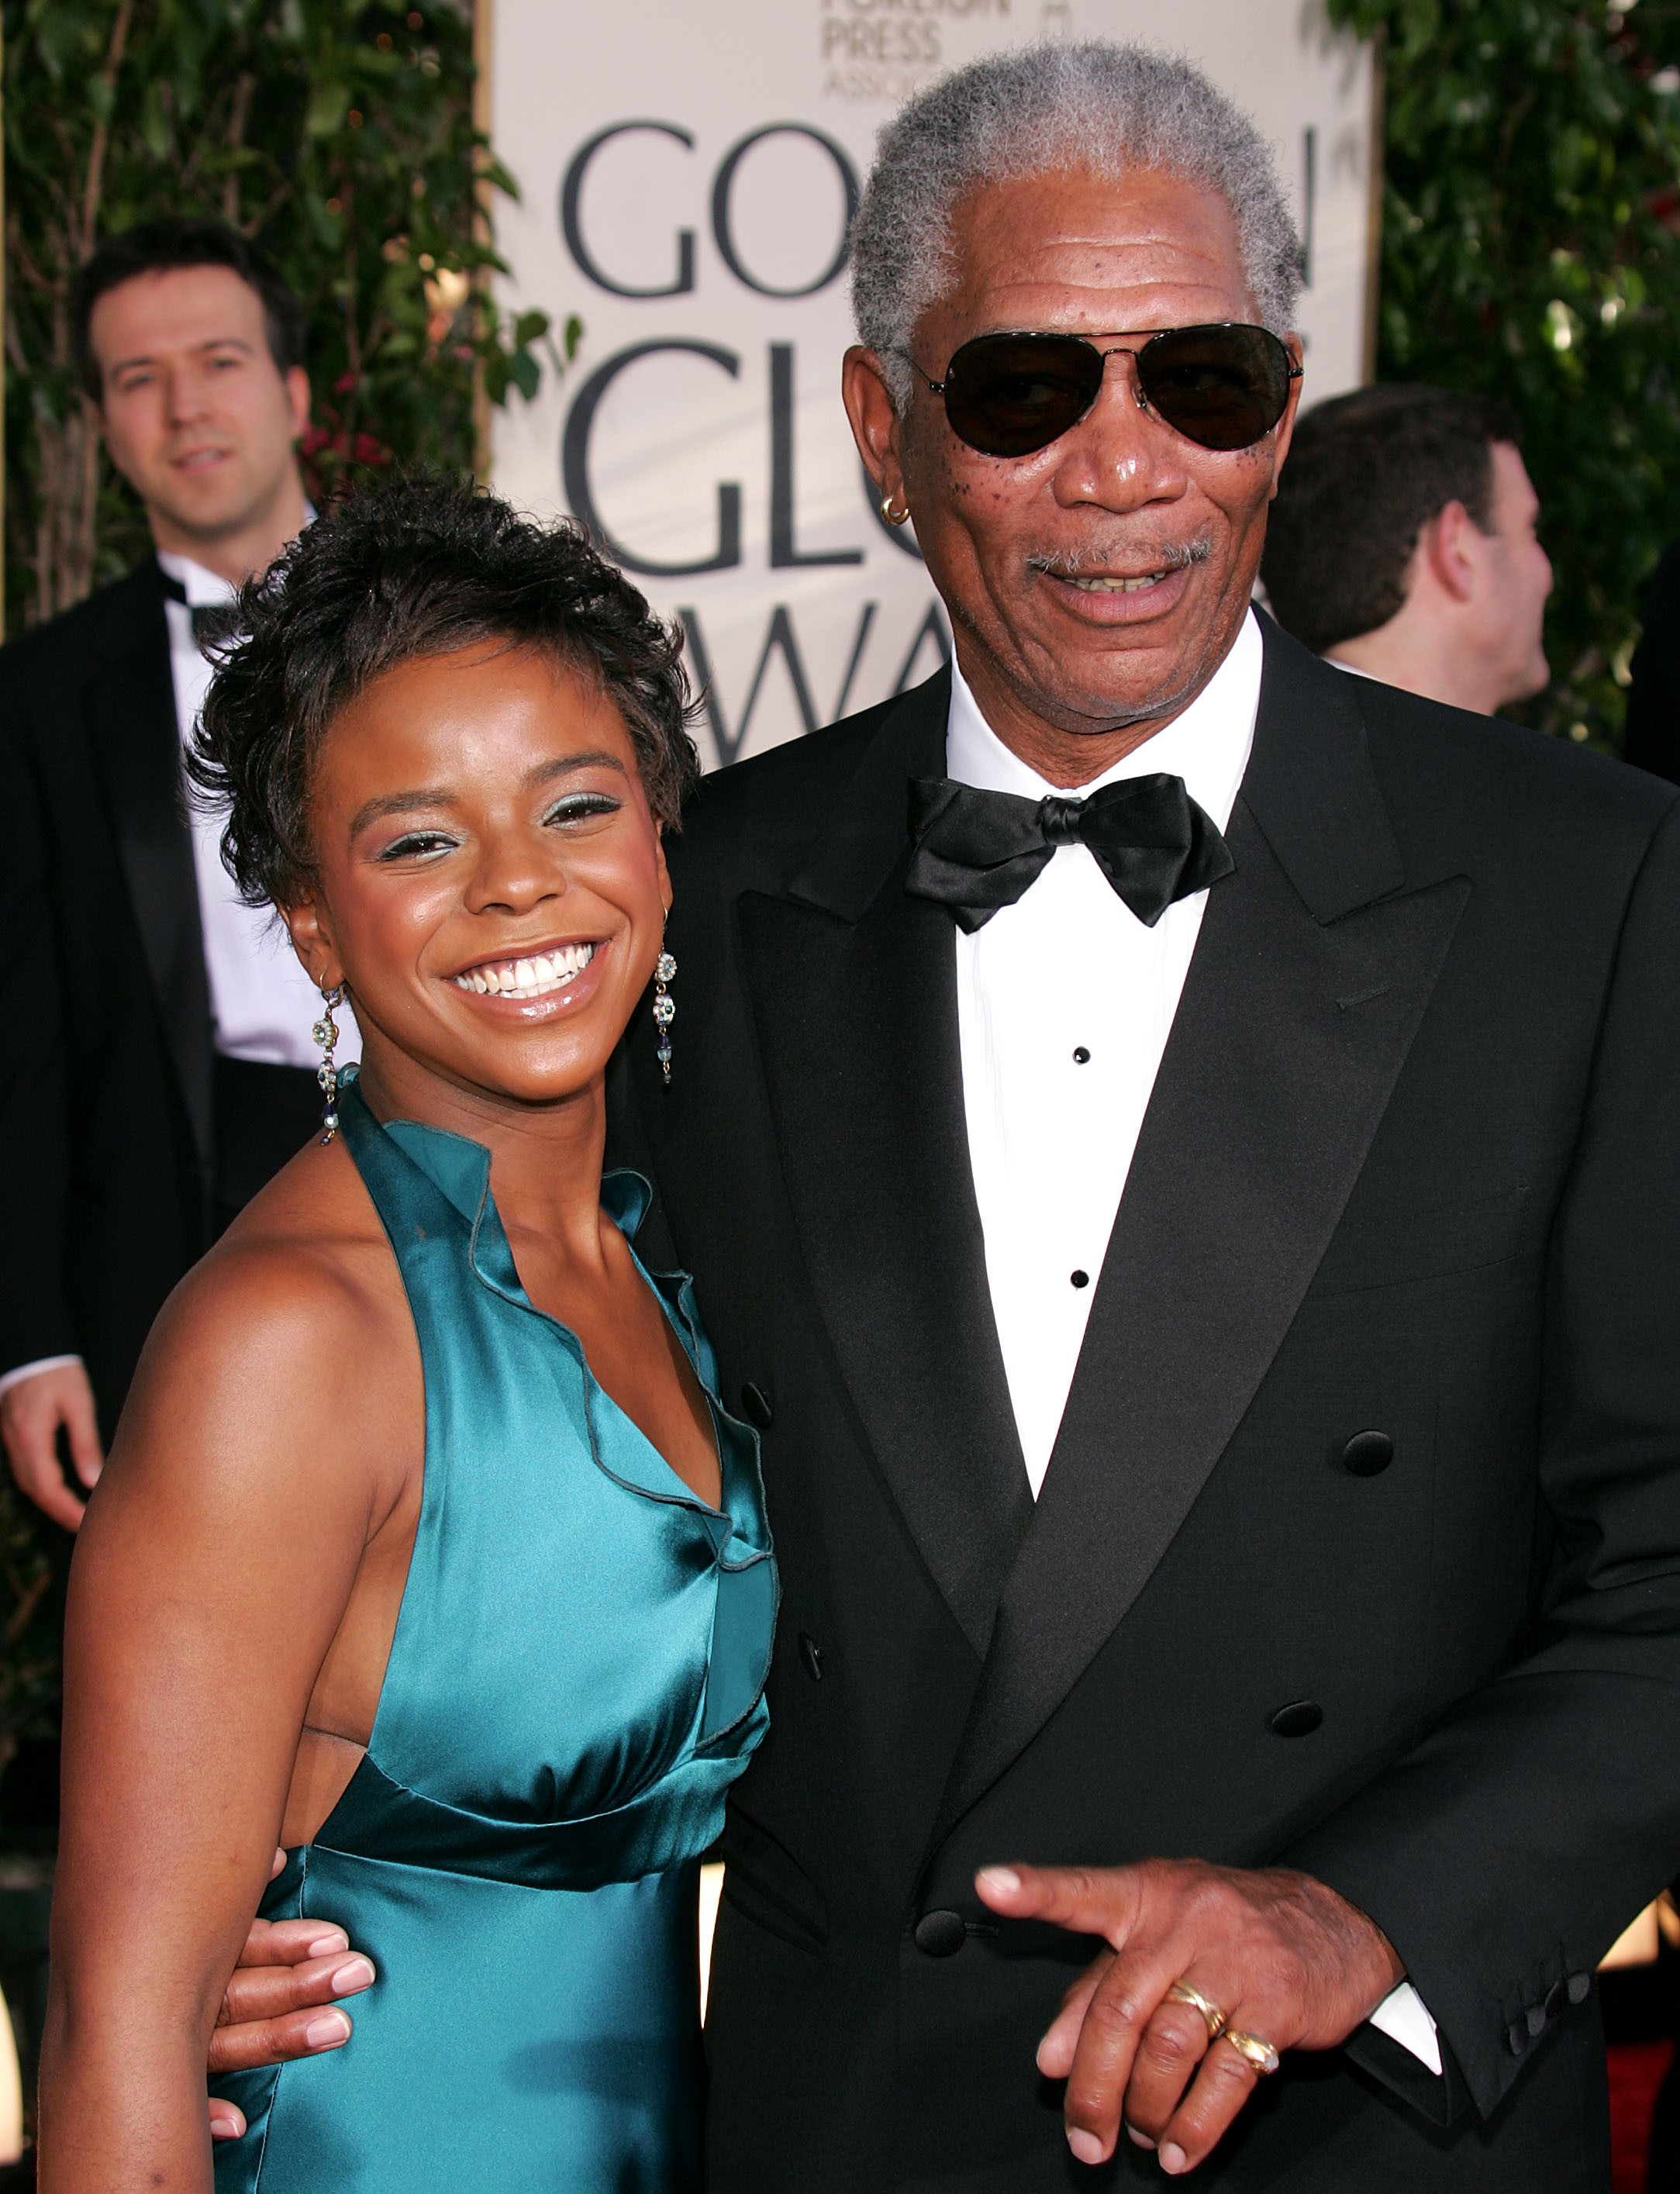 Morgan Freeman and granddaughter E'Dena Hines arrive to the 62nd Annual Golden Globe Awards on January 16, 2005 | Source: Getty Images